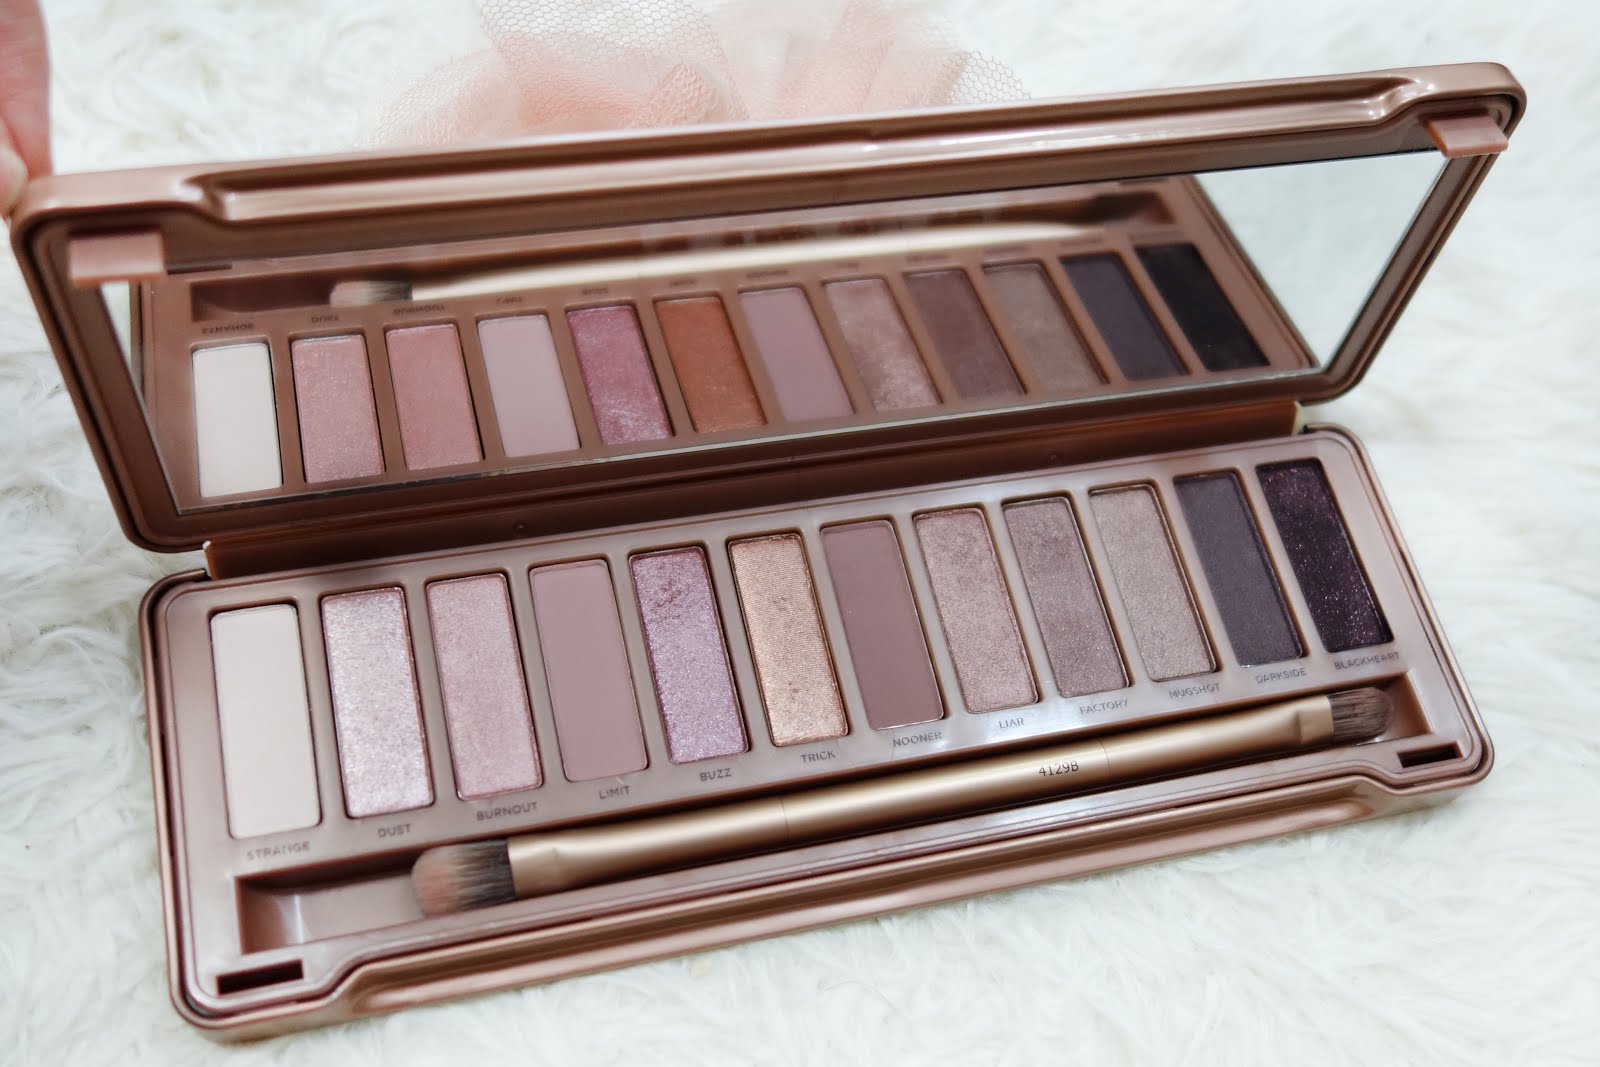 The Urban Decay Naked Ultraviolet Palette has landed - Own 